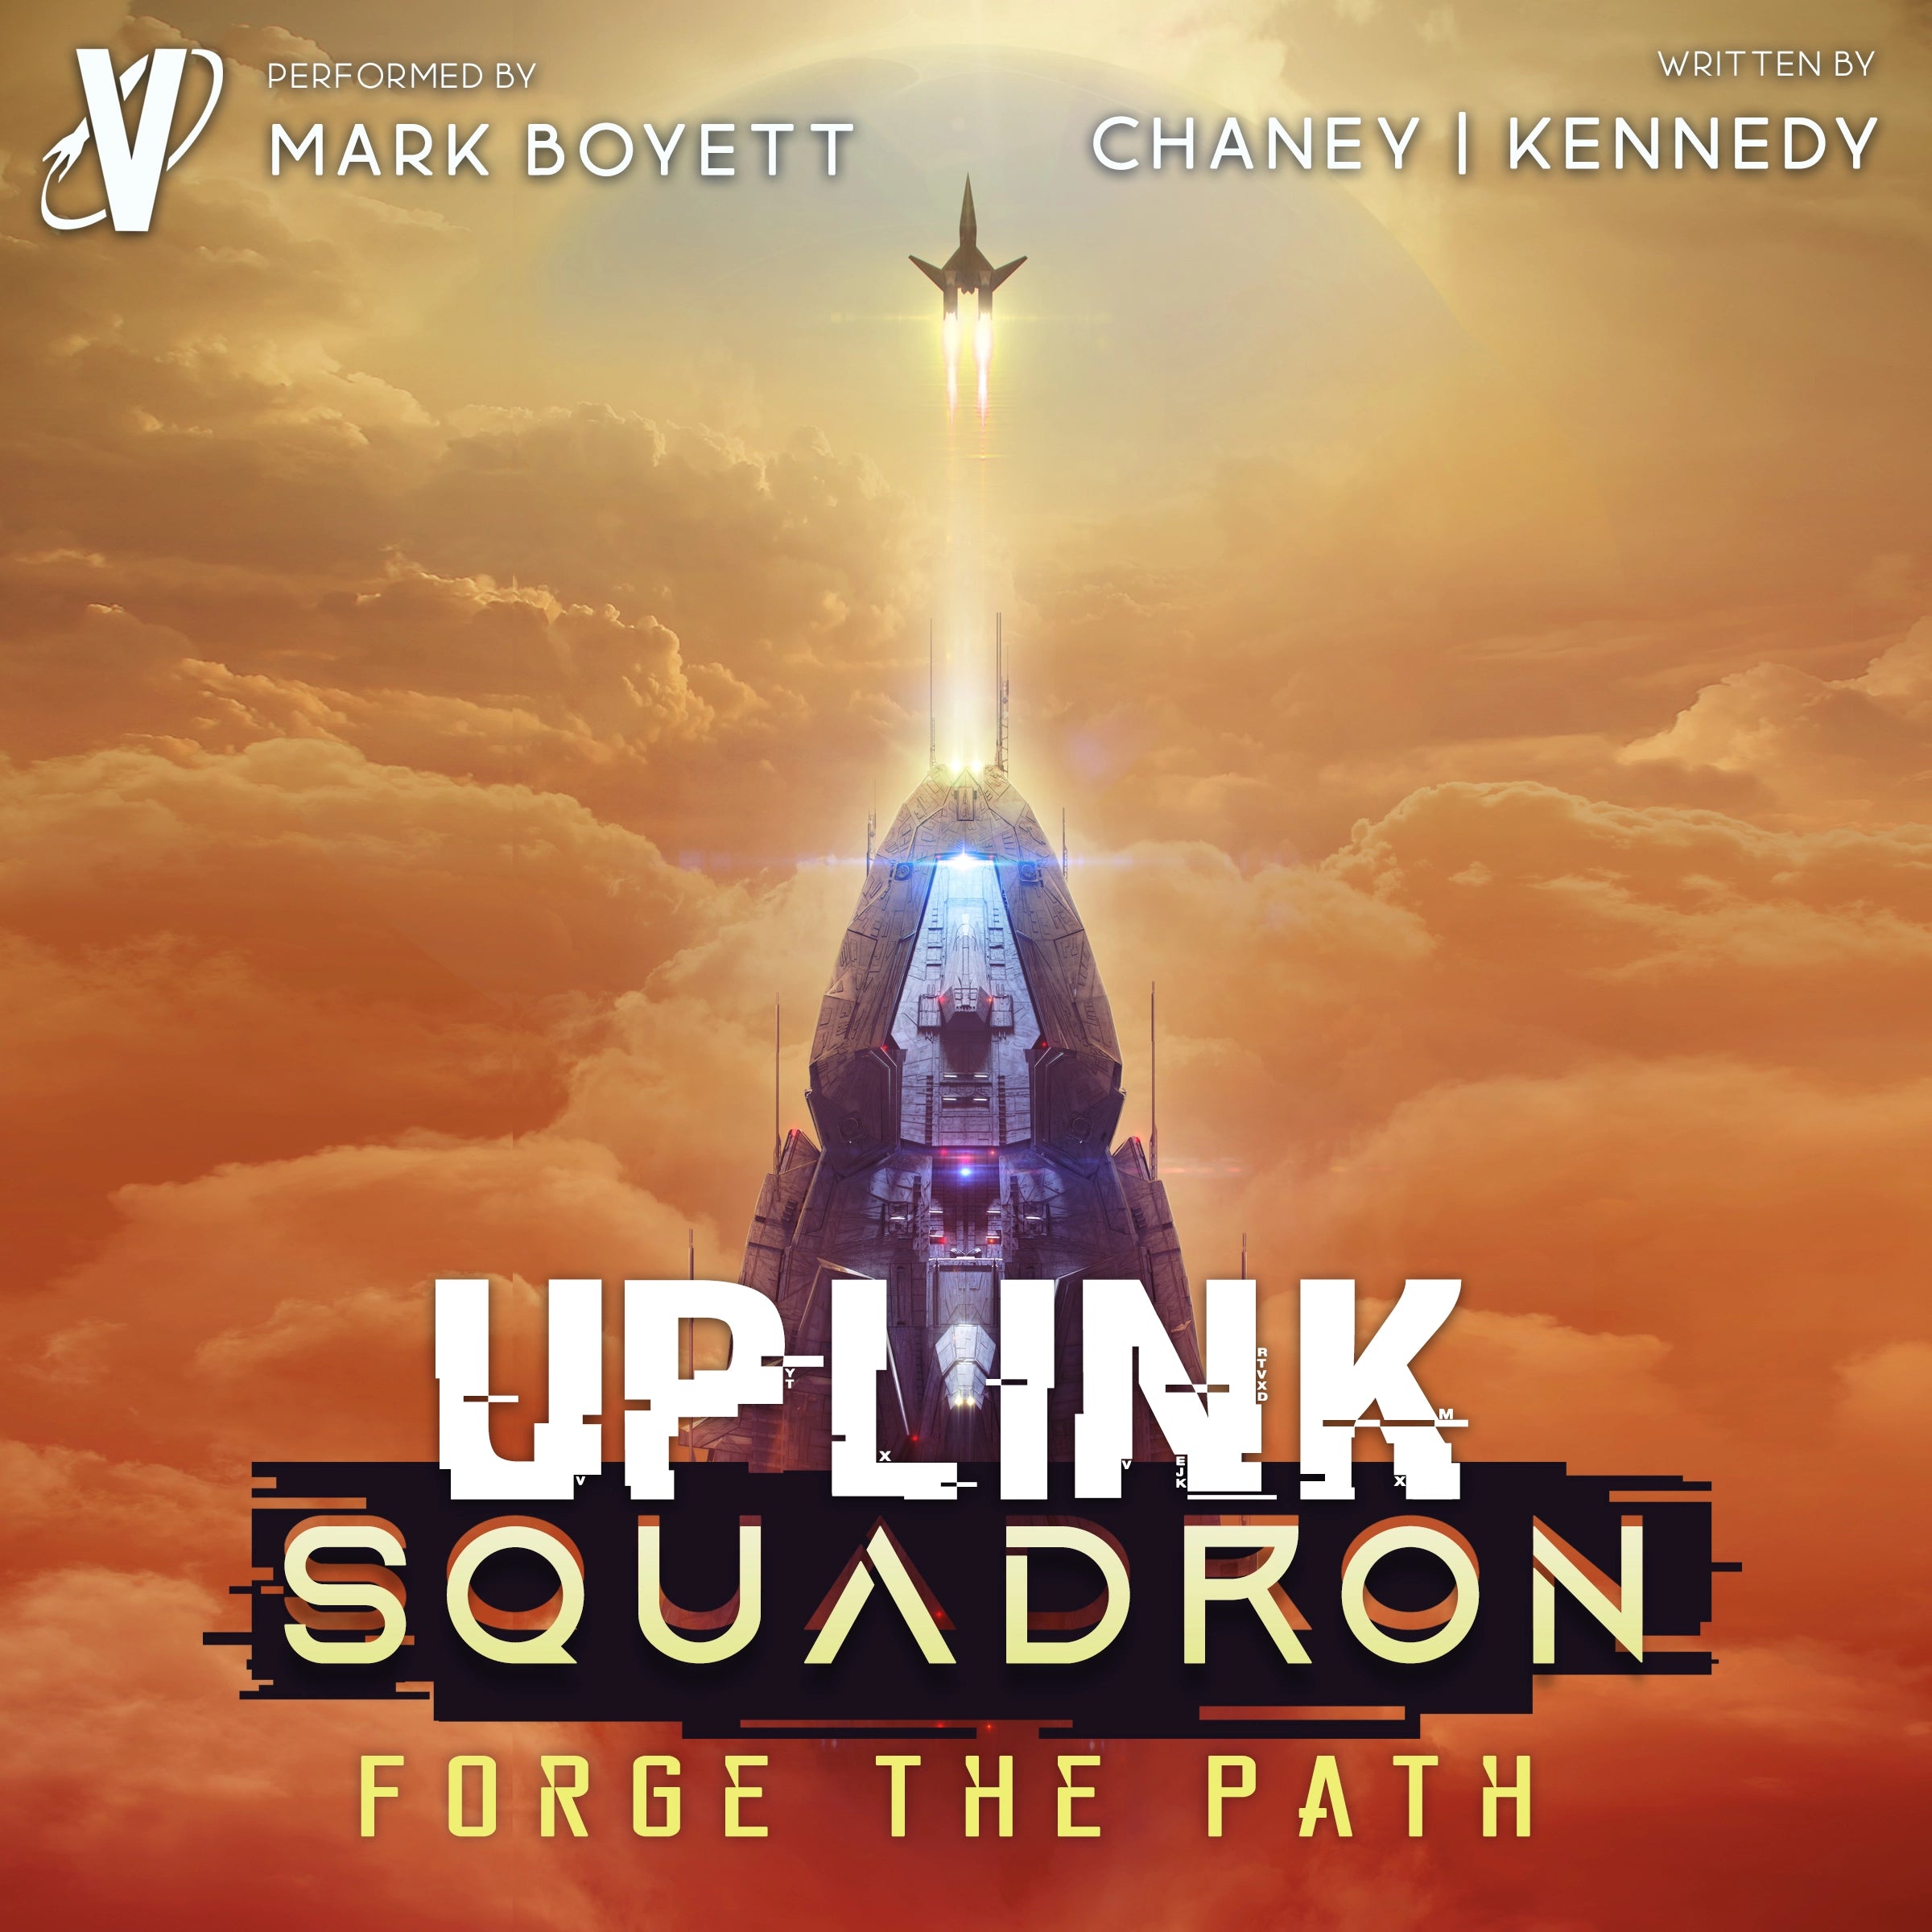 Uplink Squadron 5 Audiobook: Forge the Path